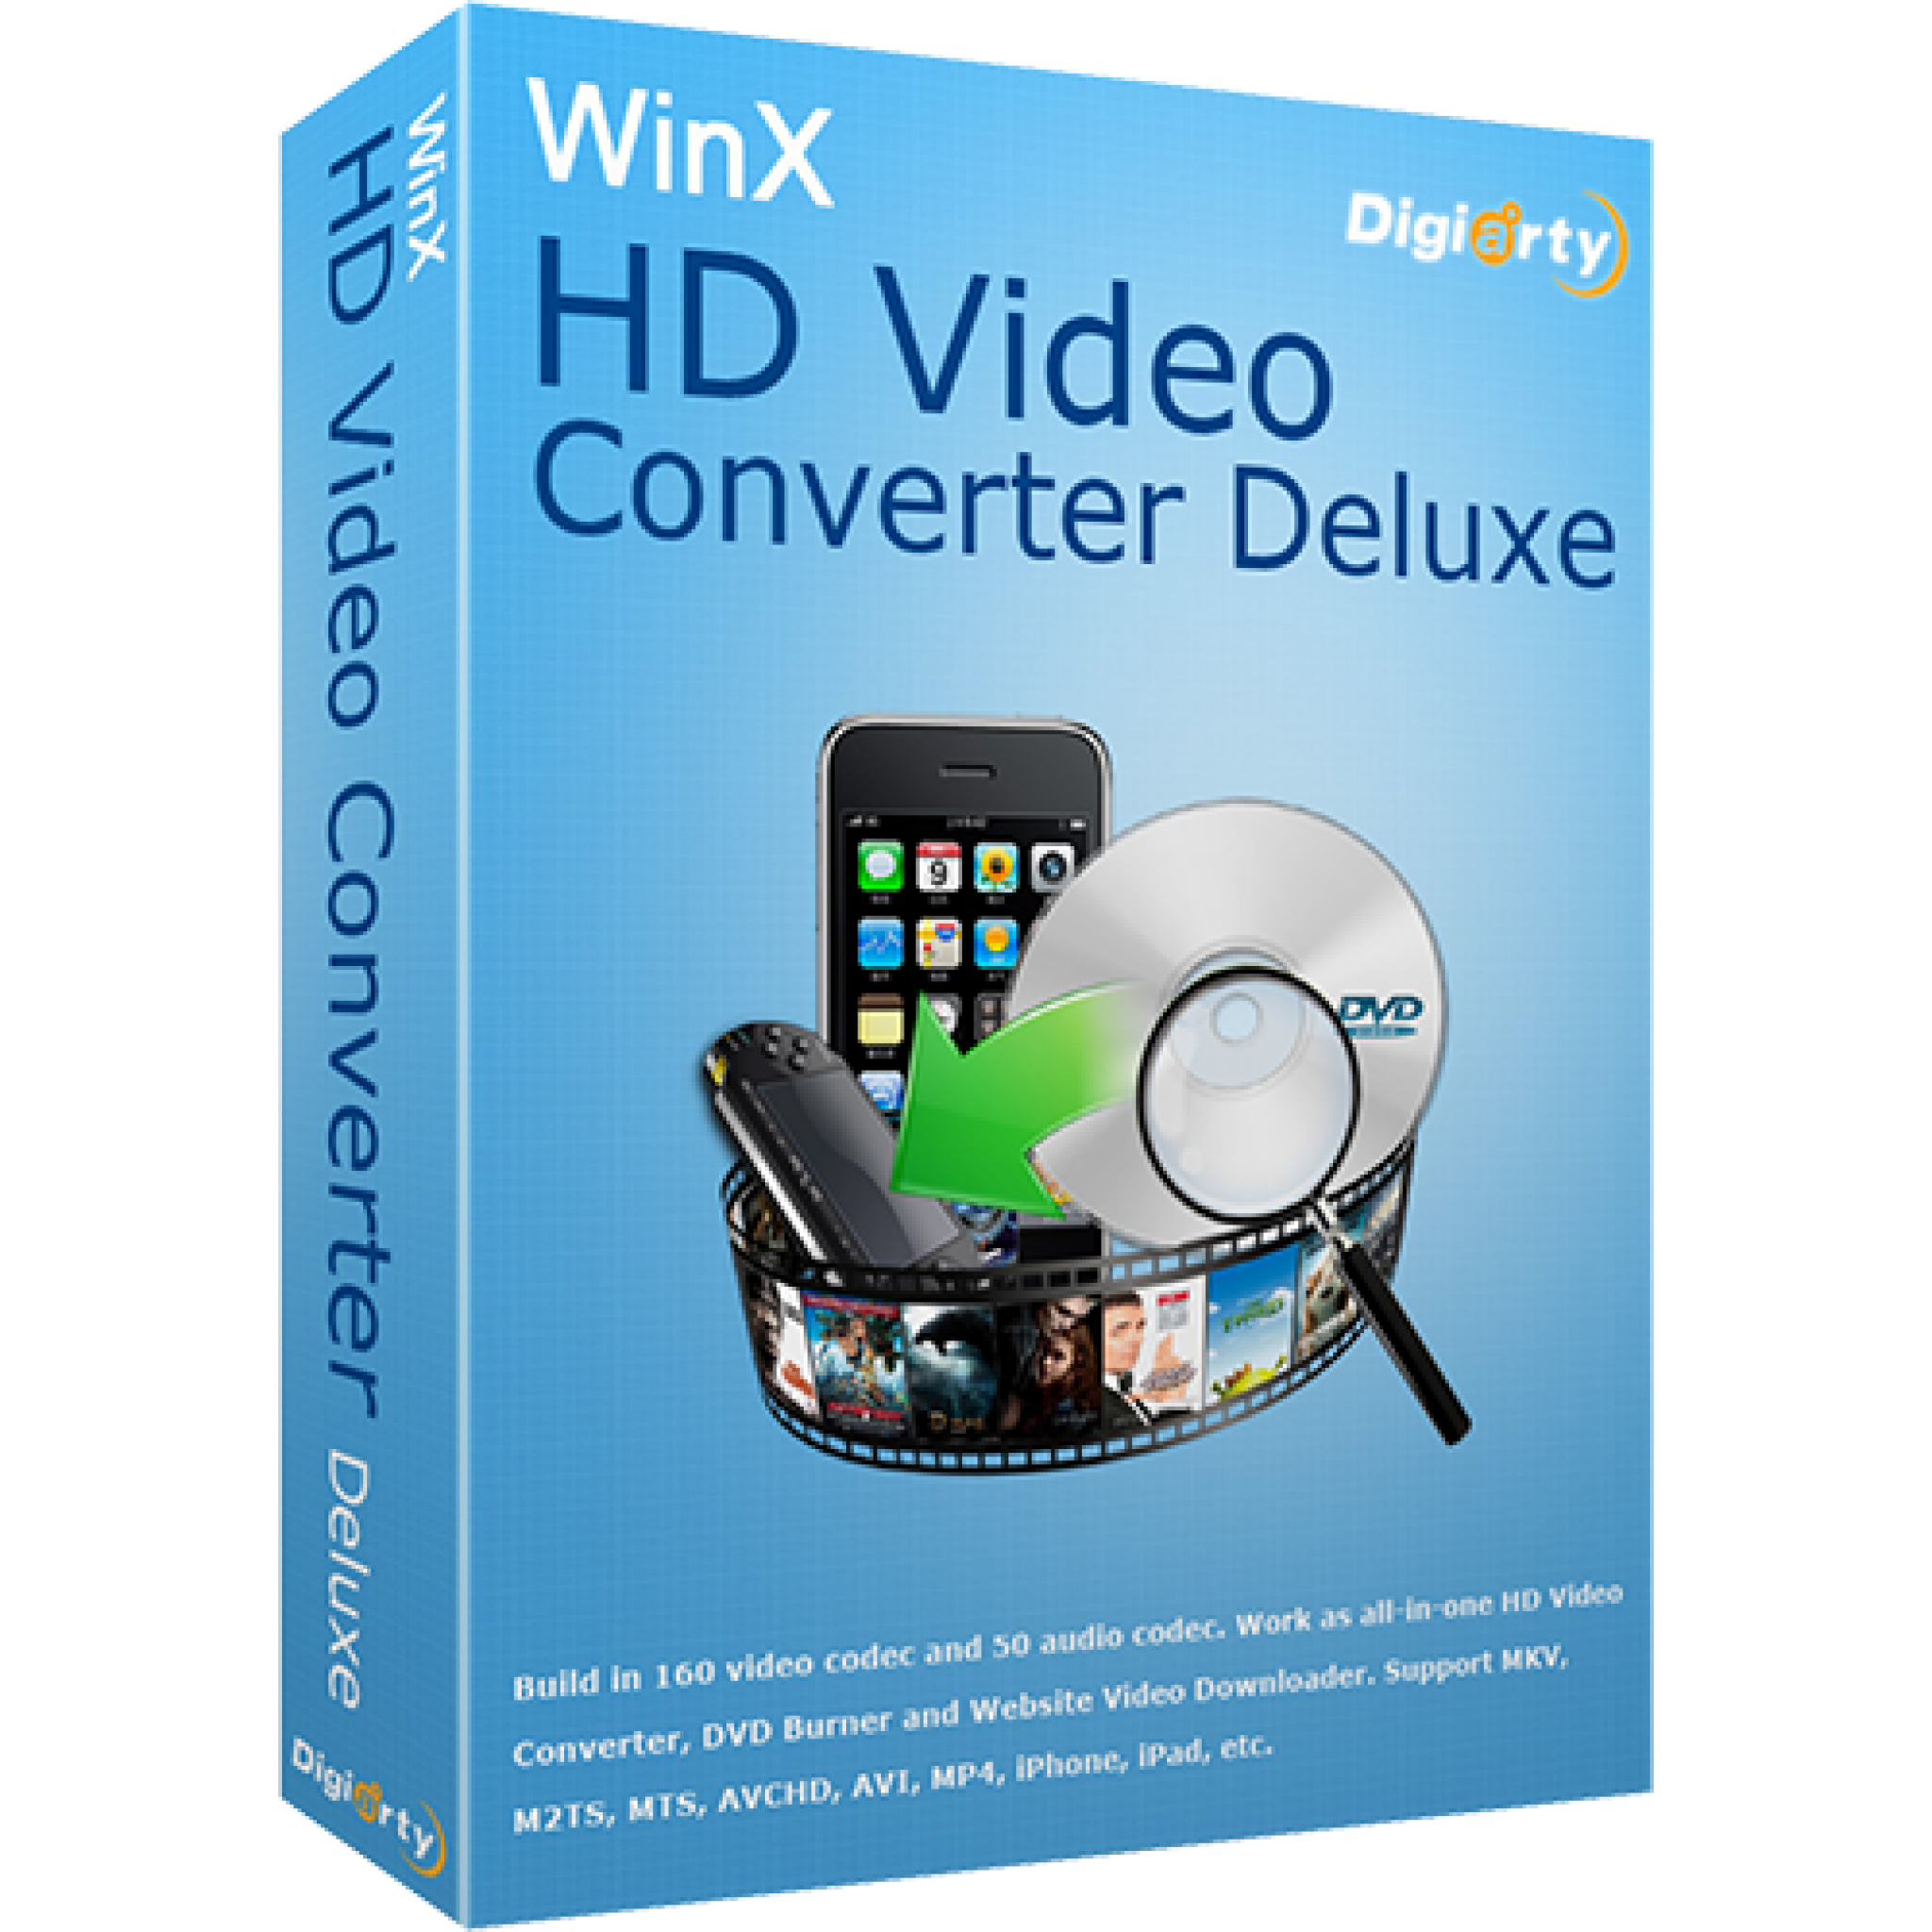 download the new WinX HD Video Converter Deluxe 5.18.1.342